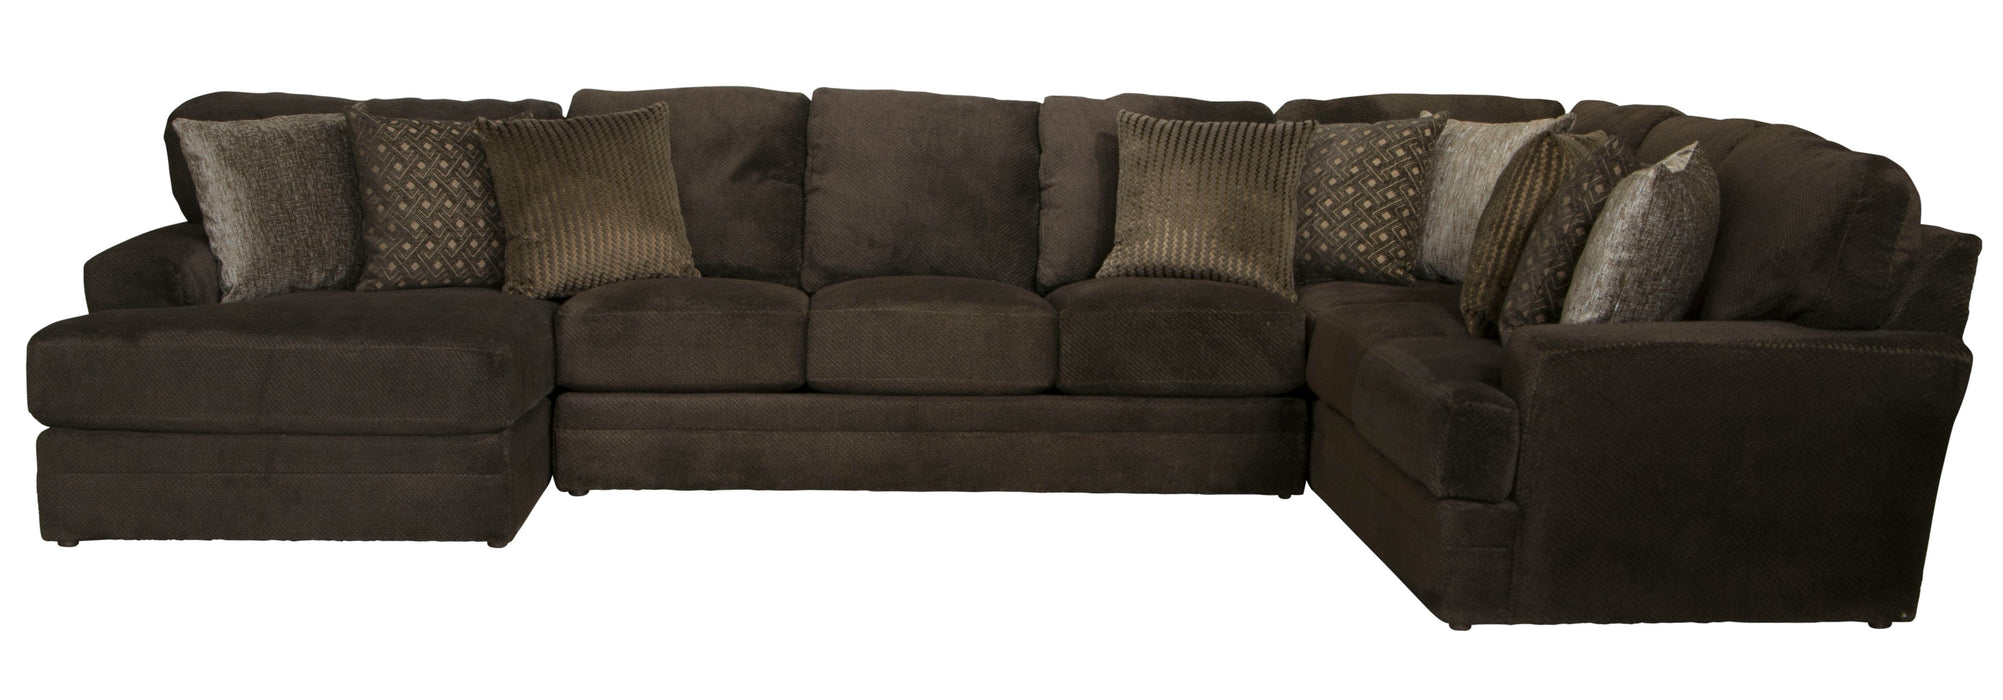 Mammoth - 3 Piece Sectional With LSF Chaise - Chocolate